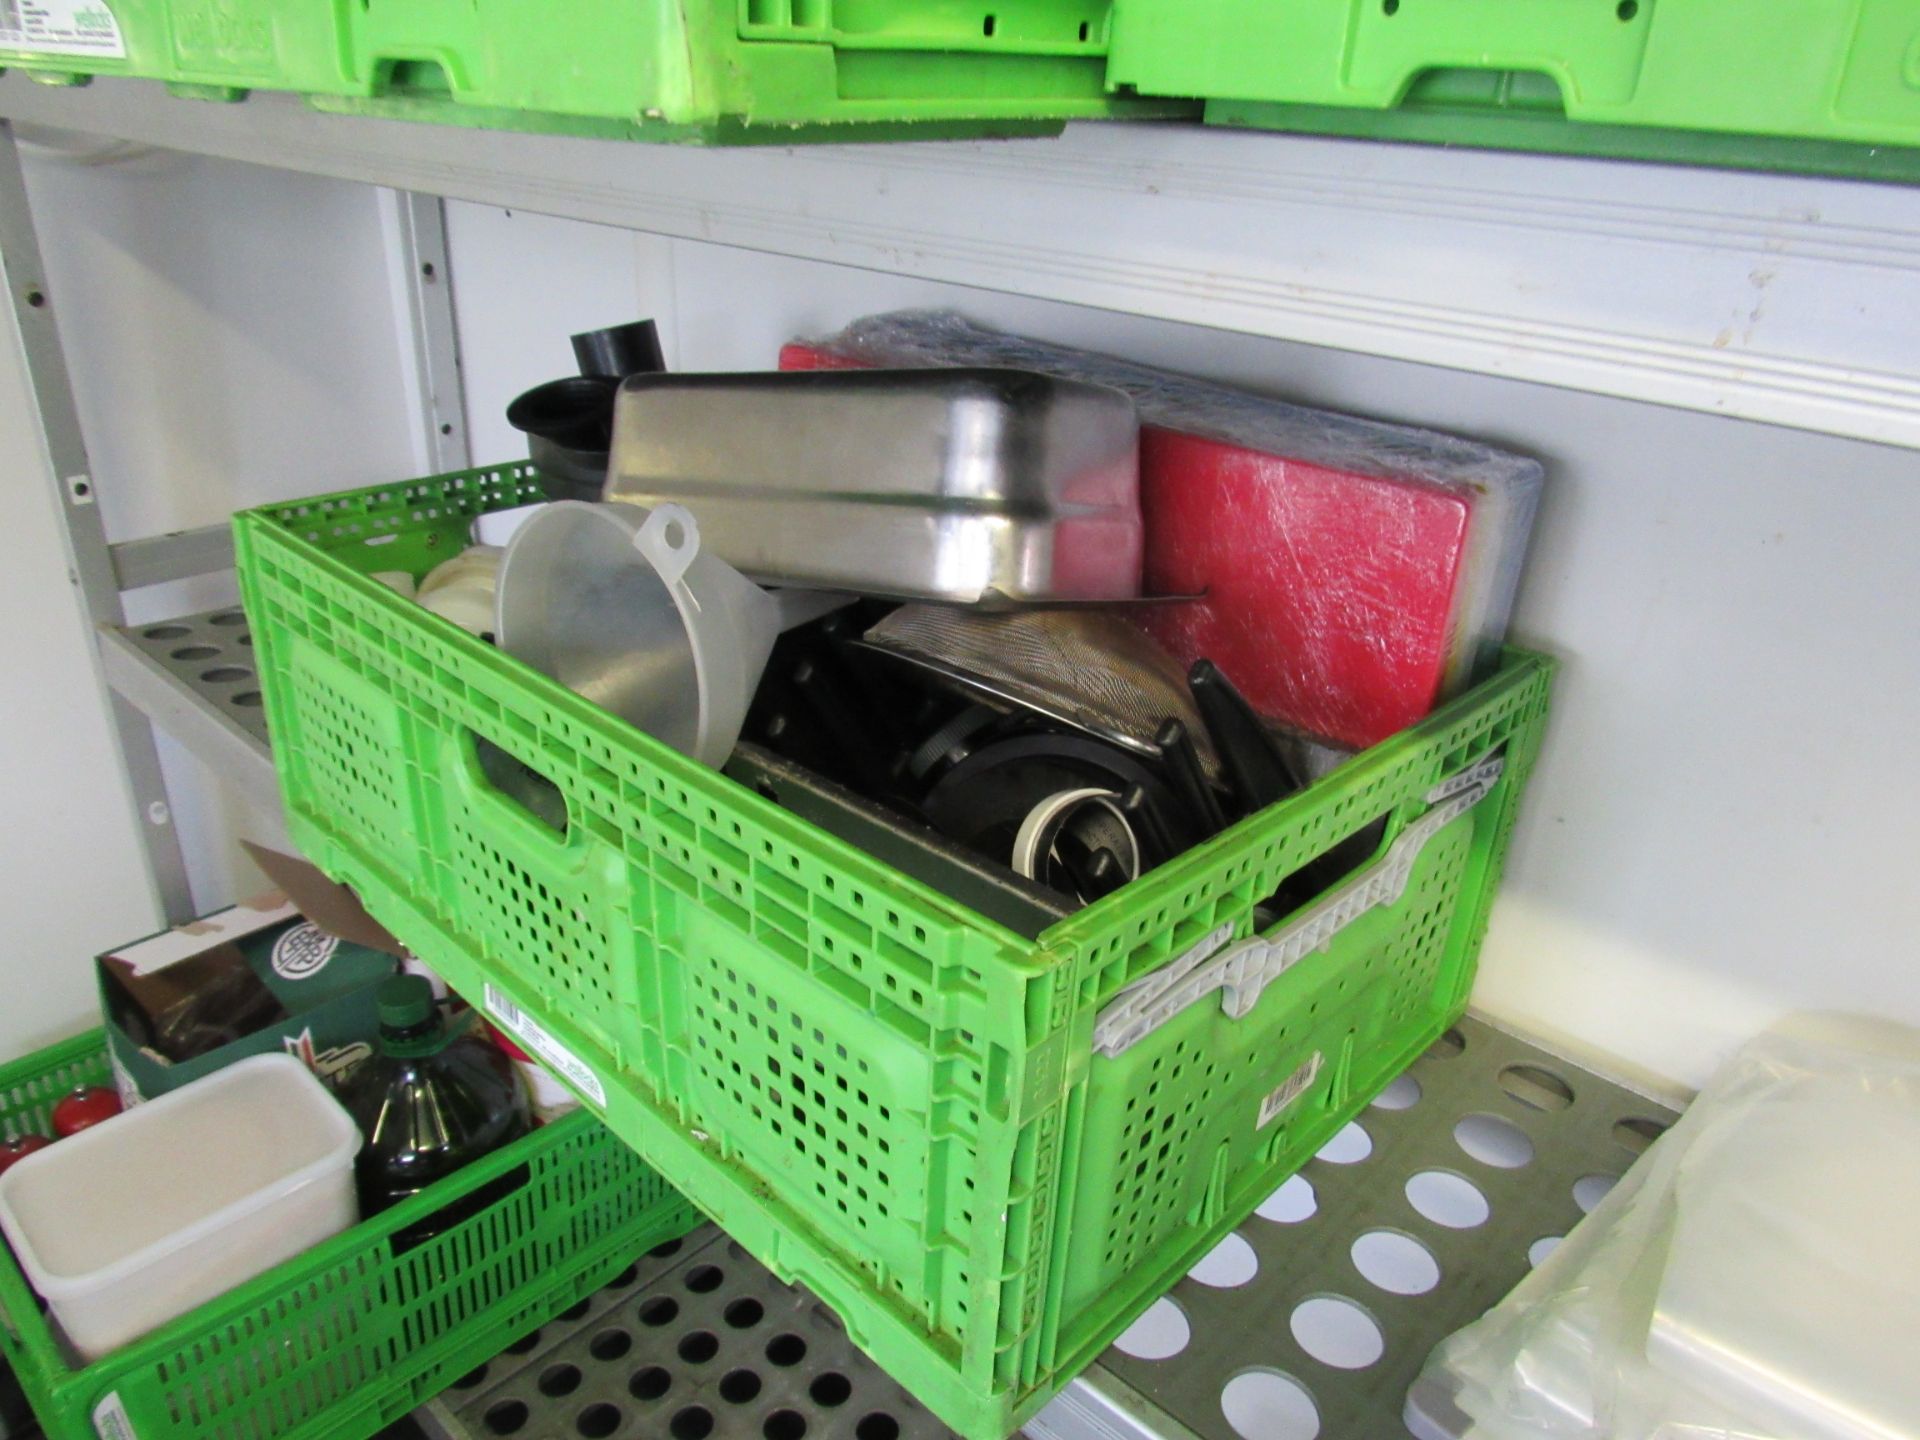 Aluminium 4 tier shelving unit and contents to include trays, food etc. - Image 3 of 3